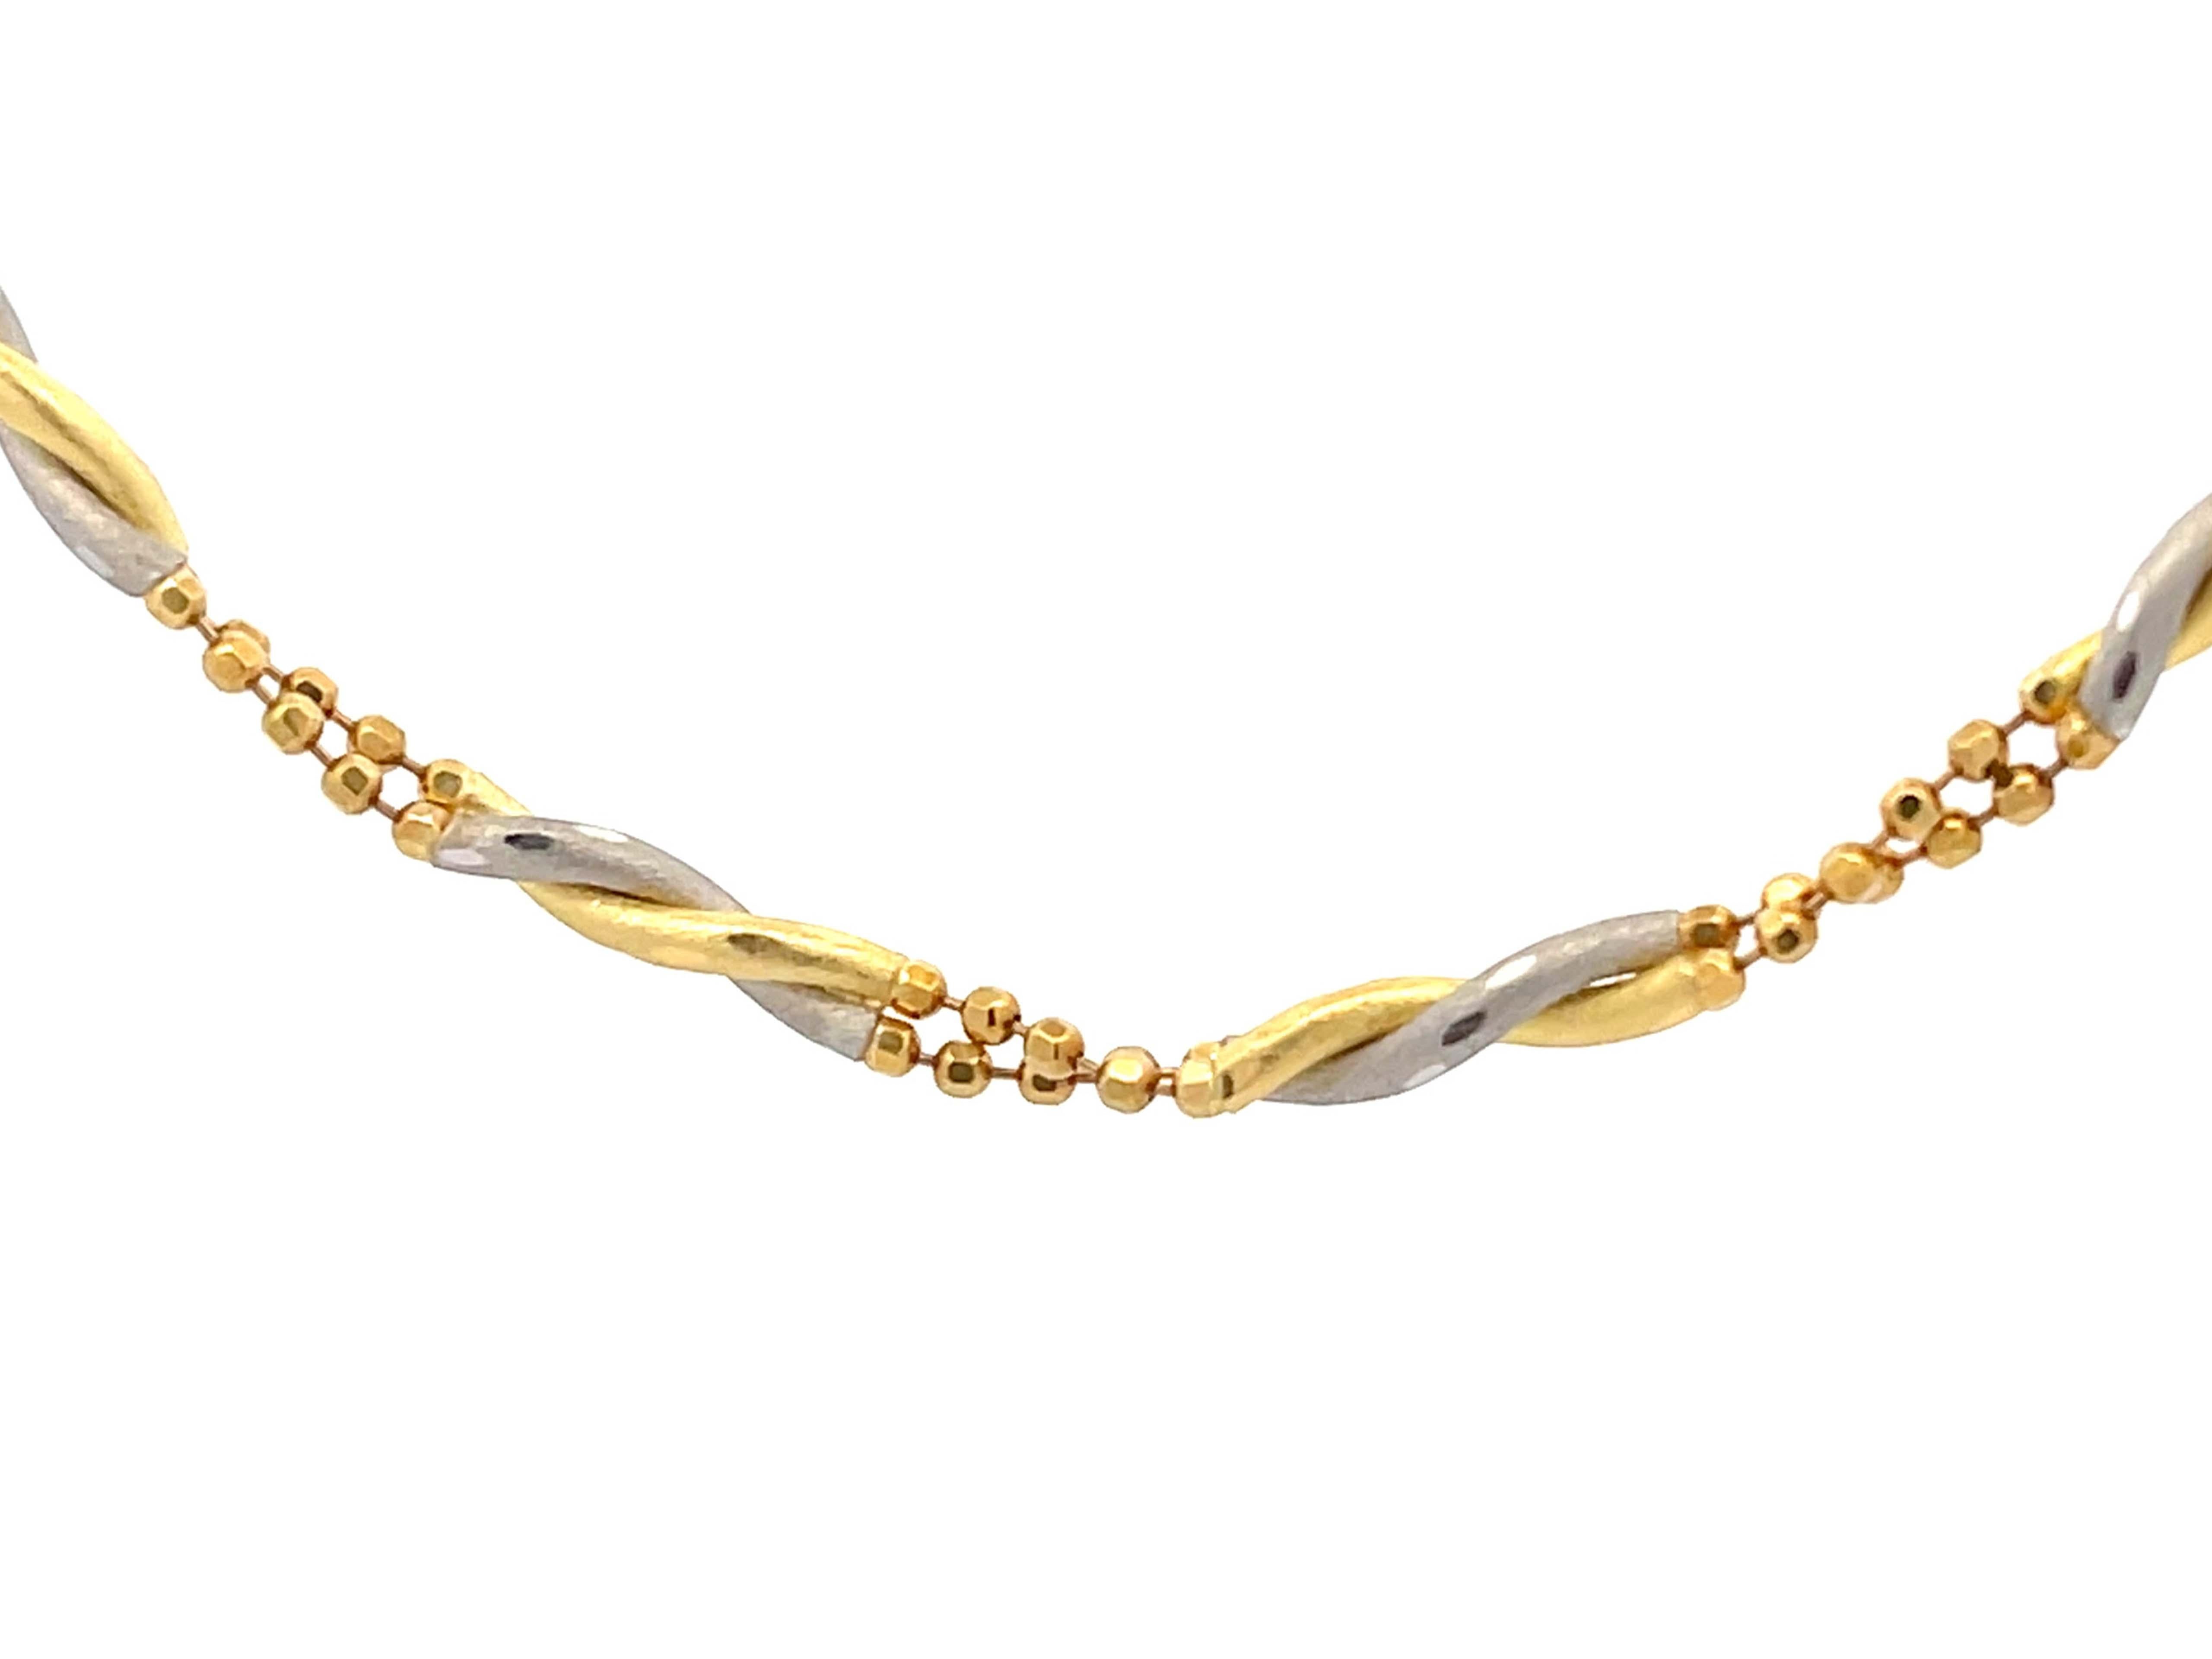 18k Yellow Gold and Platinum Chain Link Necklace  In Excellent Condition For Sale In Honolulu, HI